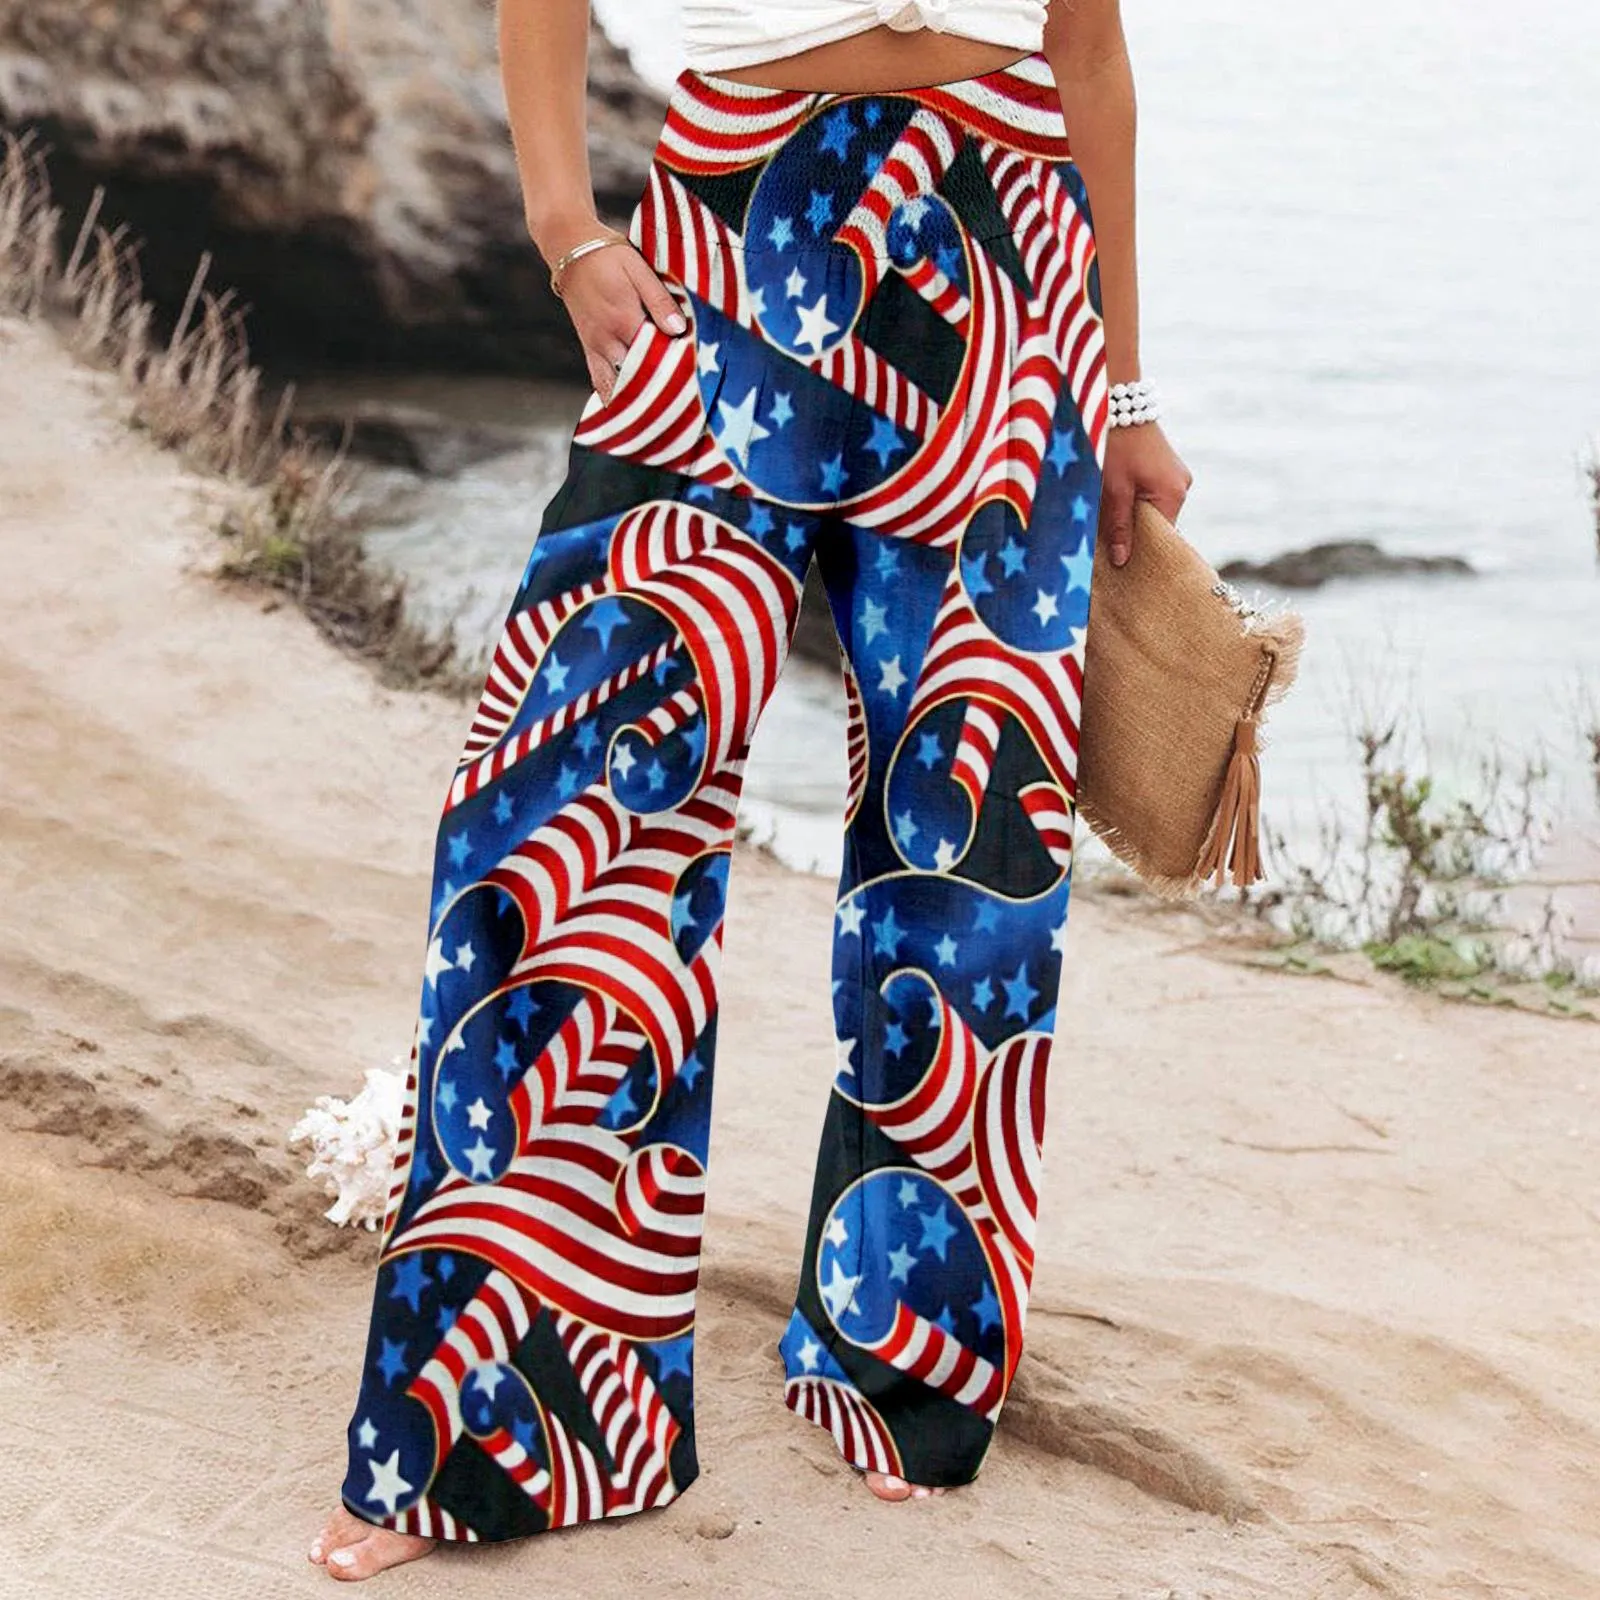 Elastic Fitness Yoga Pants Wide Leg Pants Trousers Independence Day Tie-dye Printed Slacks Spring Long Casual Baggy